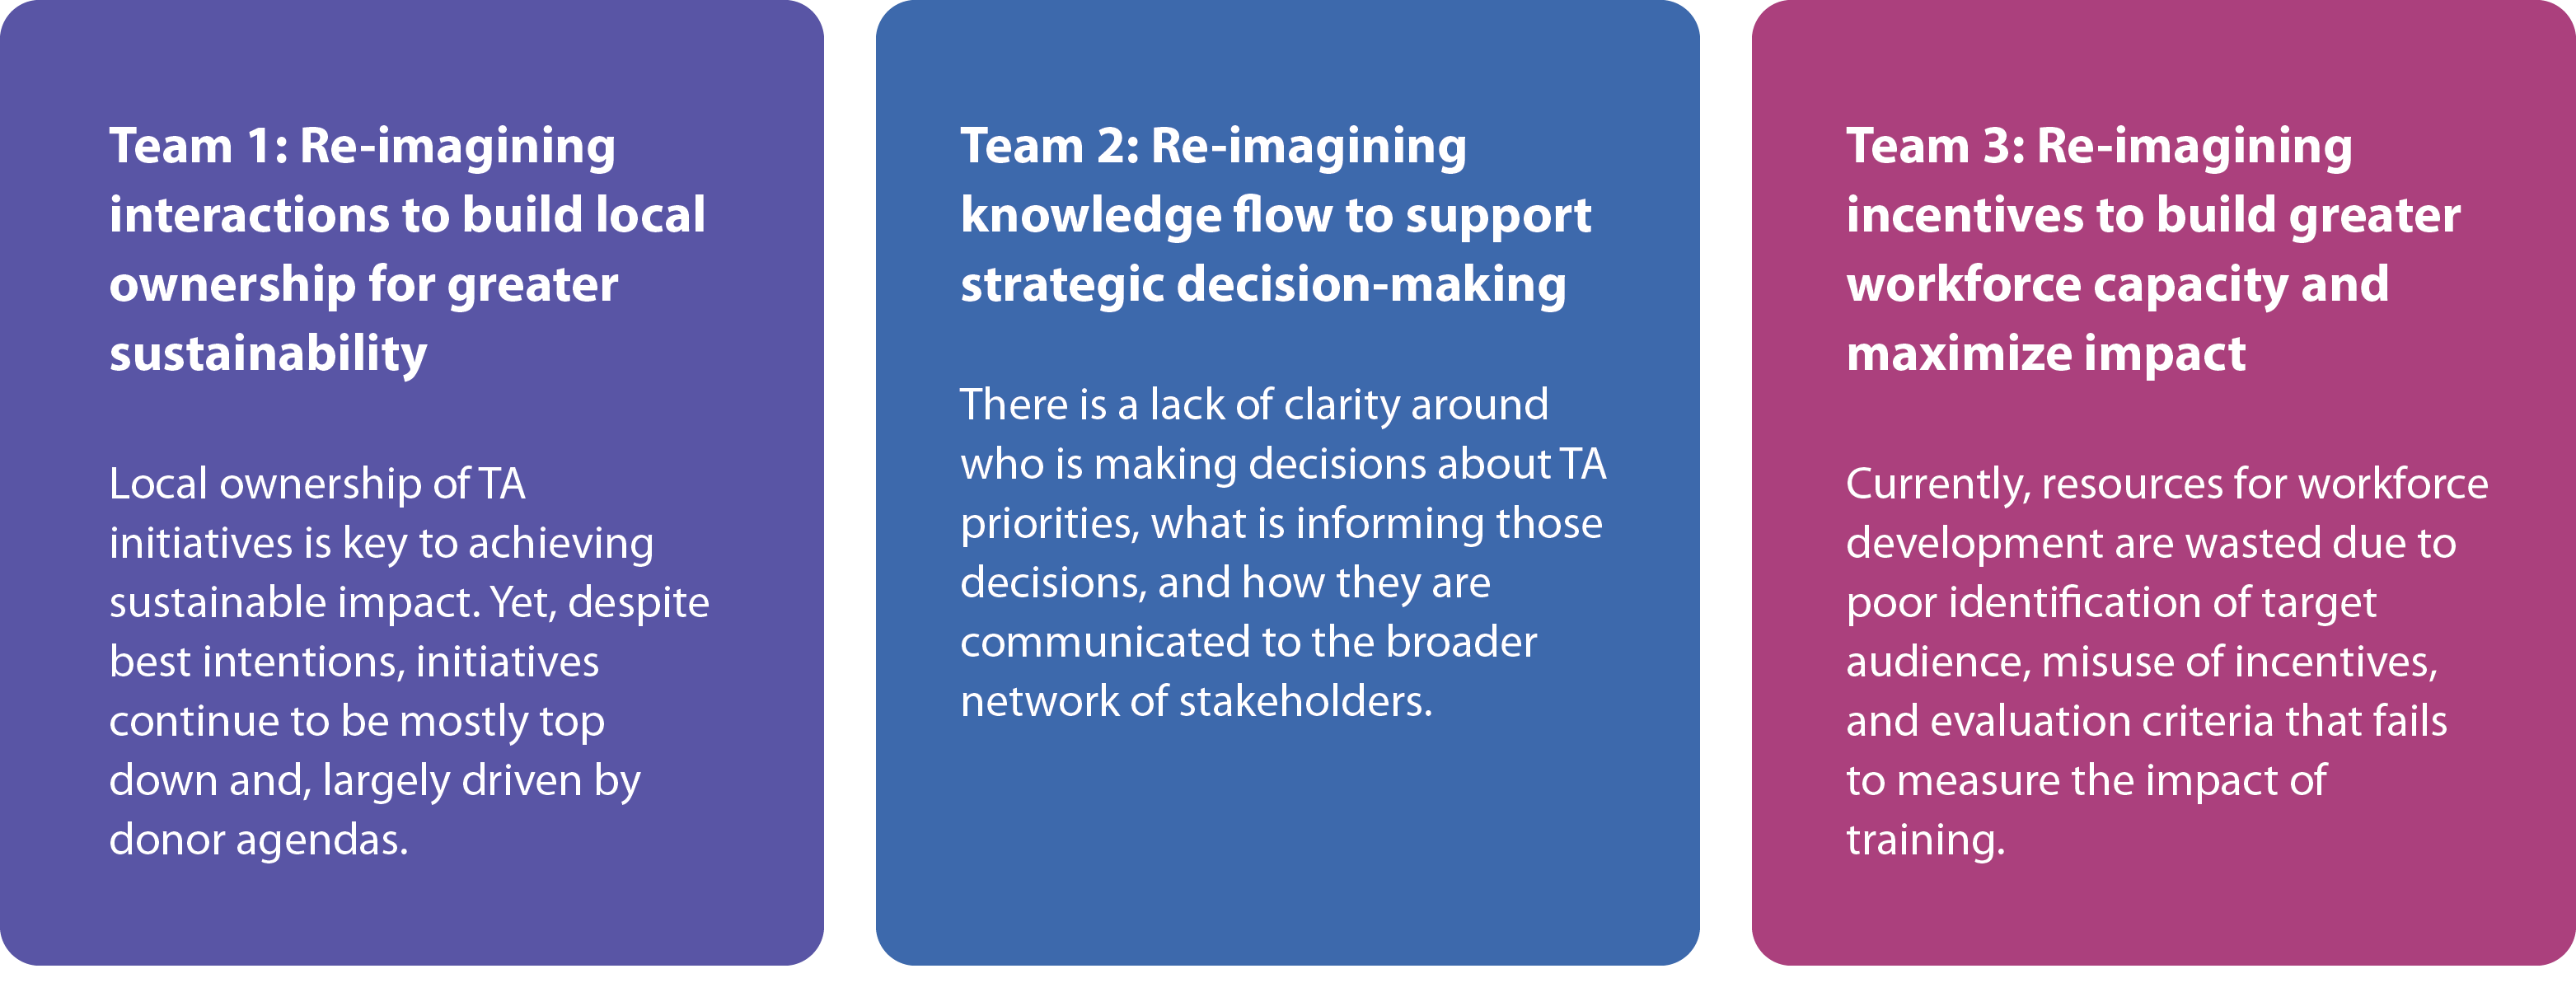 Team 1: re-imagining interaction to build local ownership for greater sustainability; Team 2: Re-imagining knowledge flow to support strategic decision-making; Team 3: Re-imagining incentives to build greater workforce capacity and maximize impact